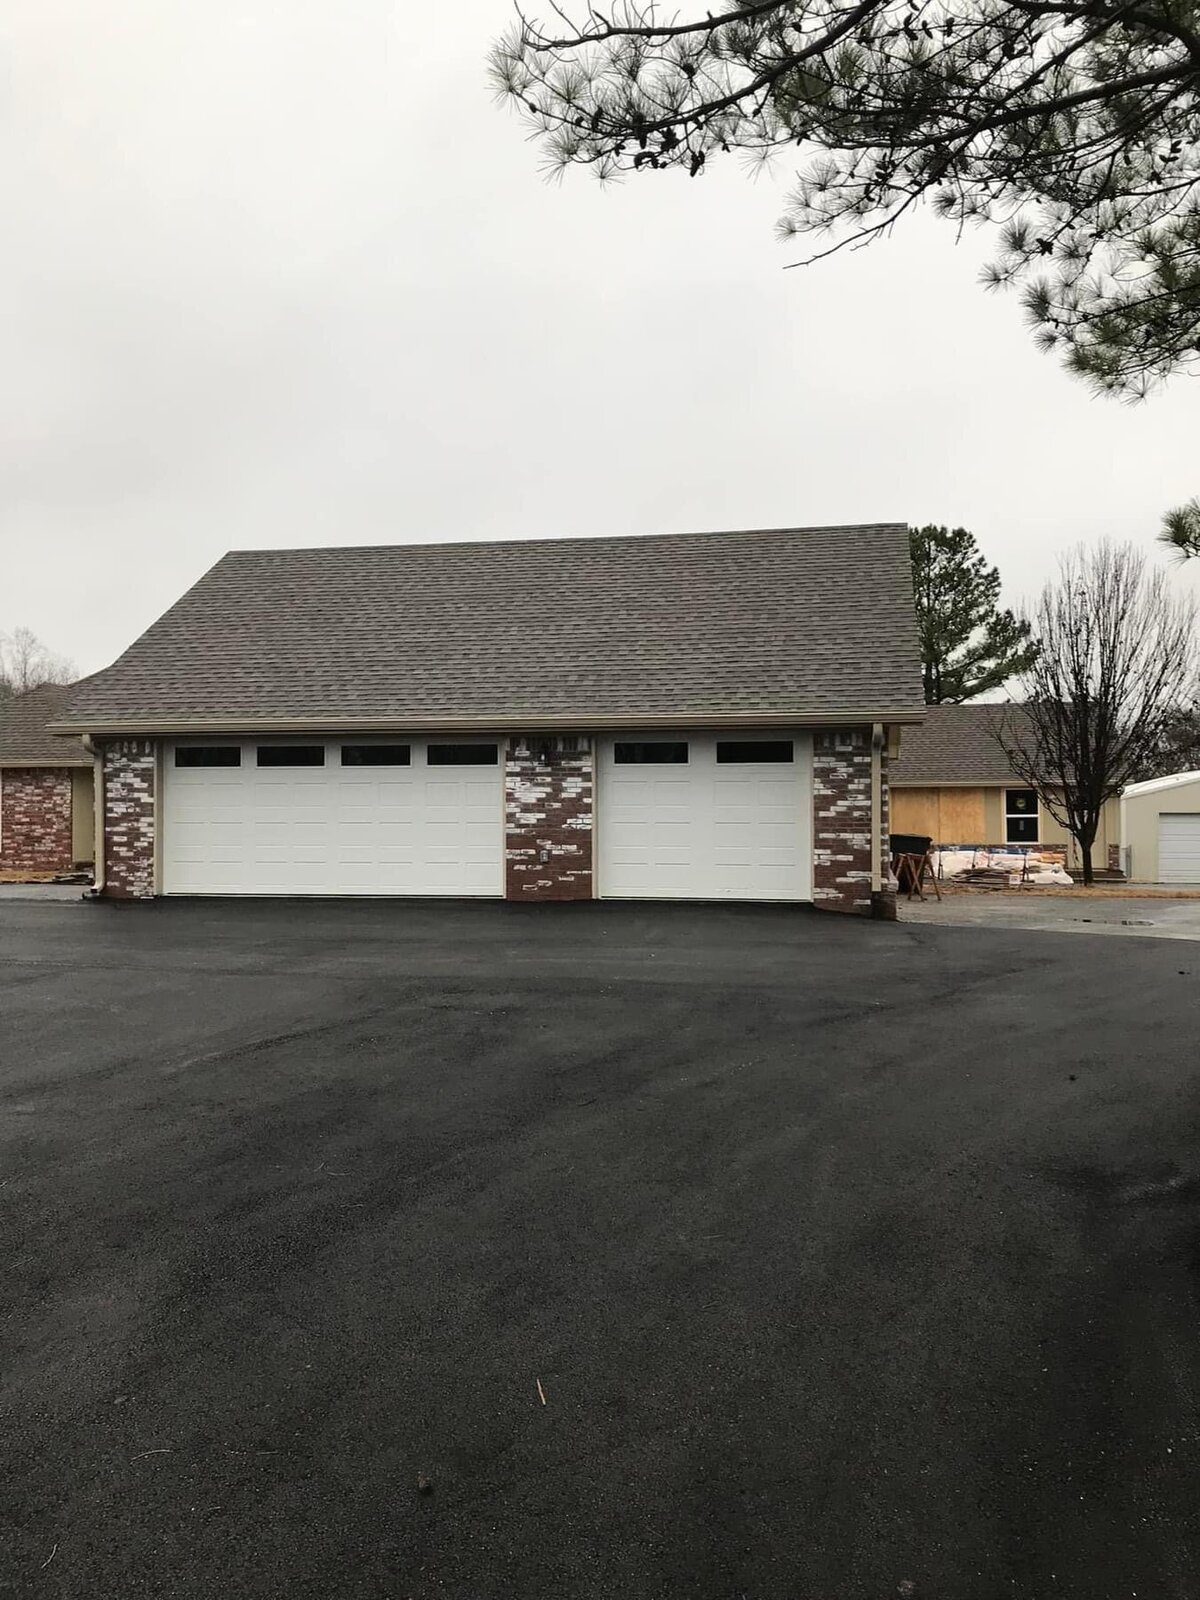 New Driveway and Garage Addition